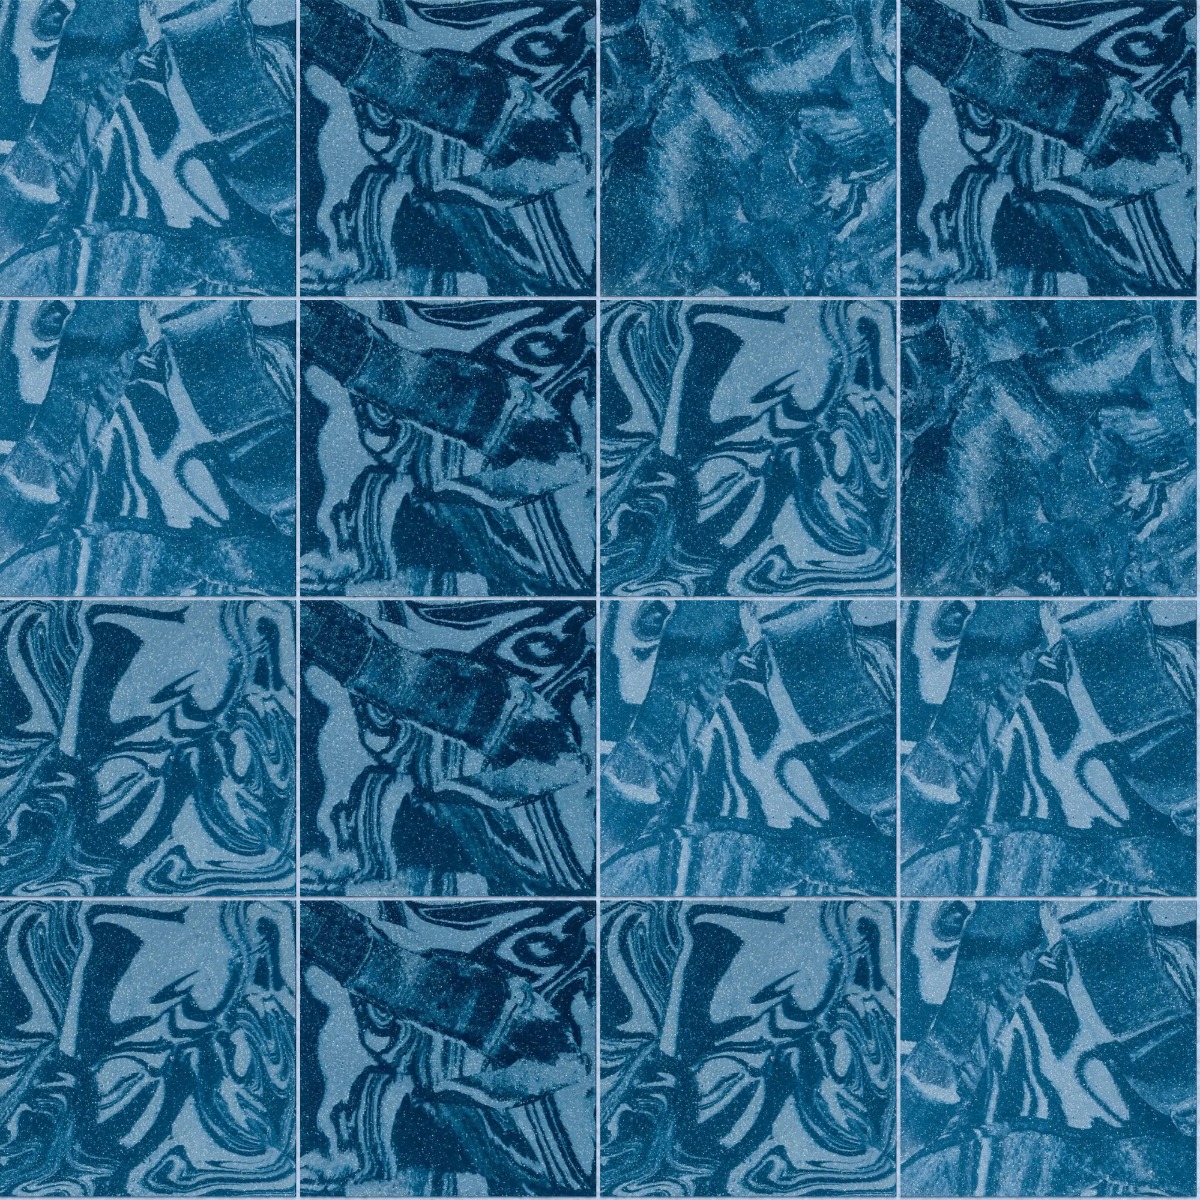 A seamless tile texture with dark blue encaustic tile tiles arranged in a Stack pattern